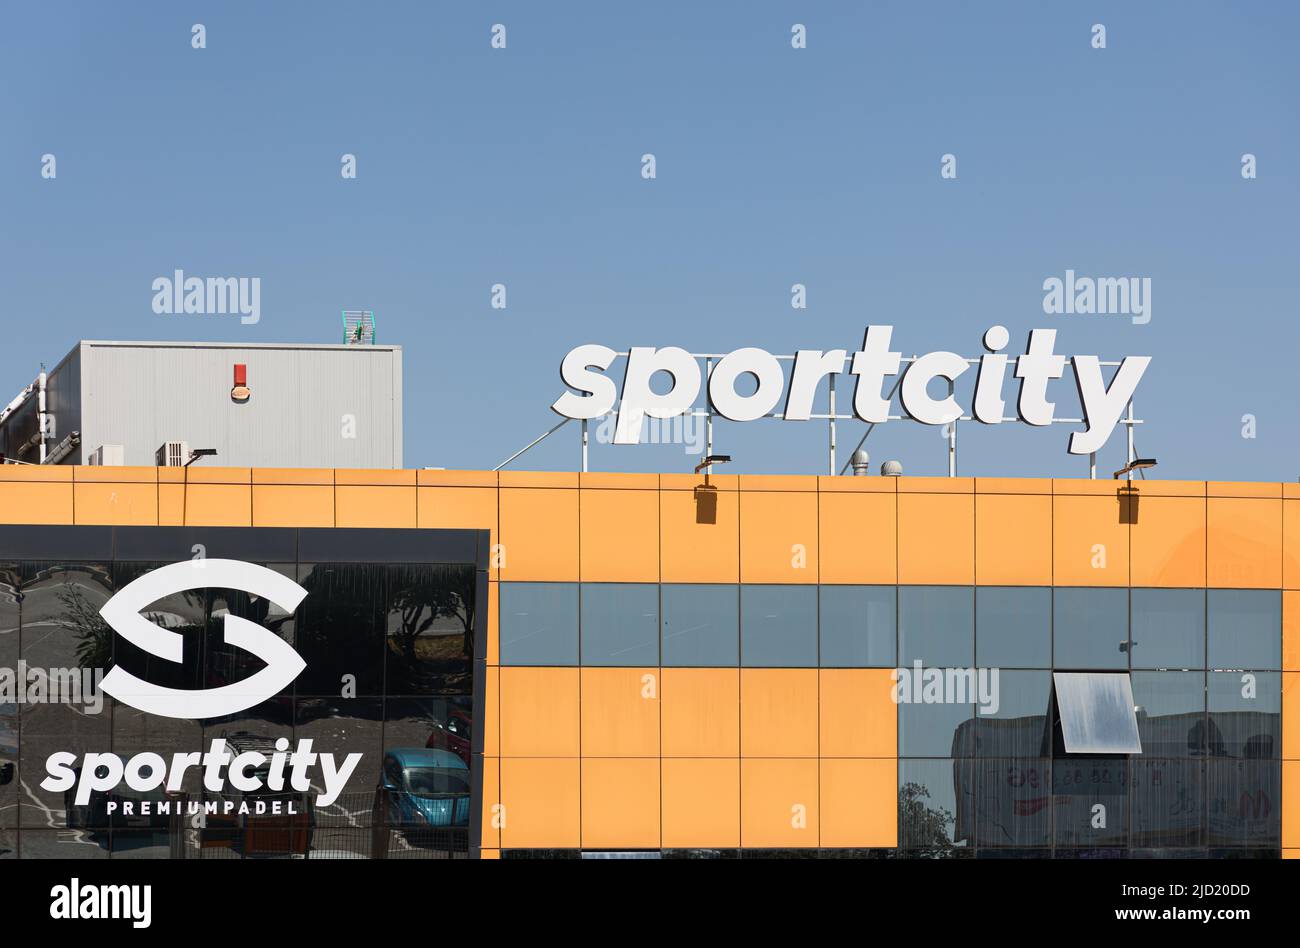 MASSANASSA, SPAIN - JUNE 06, 2022: Sportcity is a sports complex with paddle tennis courts, gym, soccer fields and outdoor training box Stock Photo